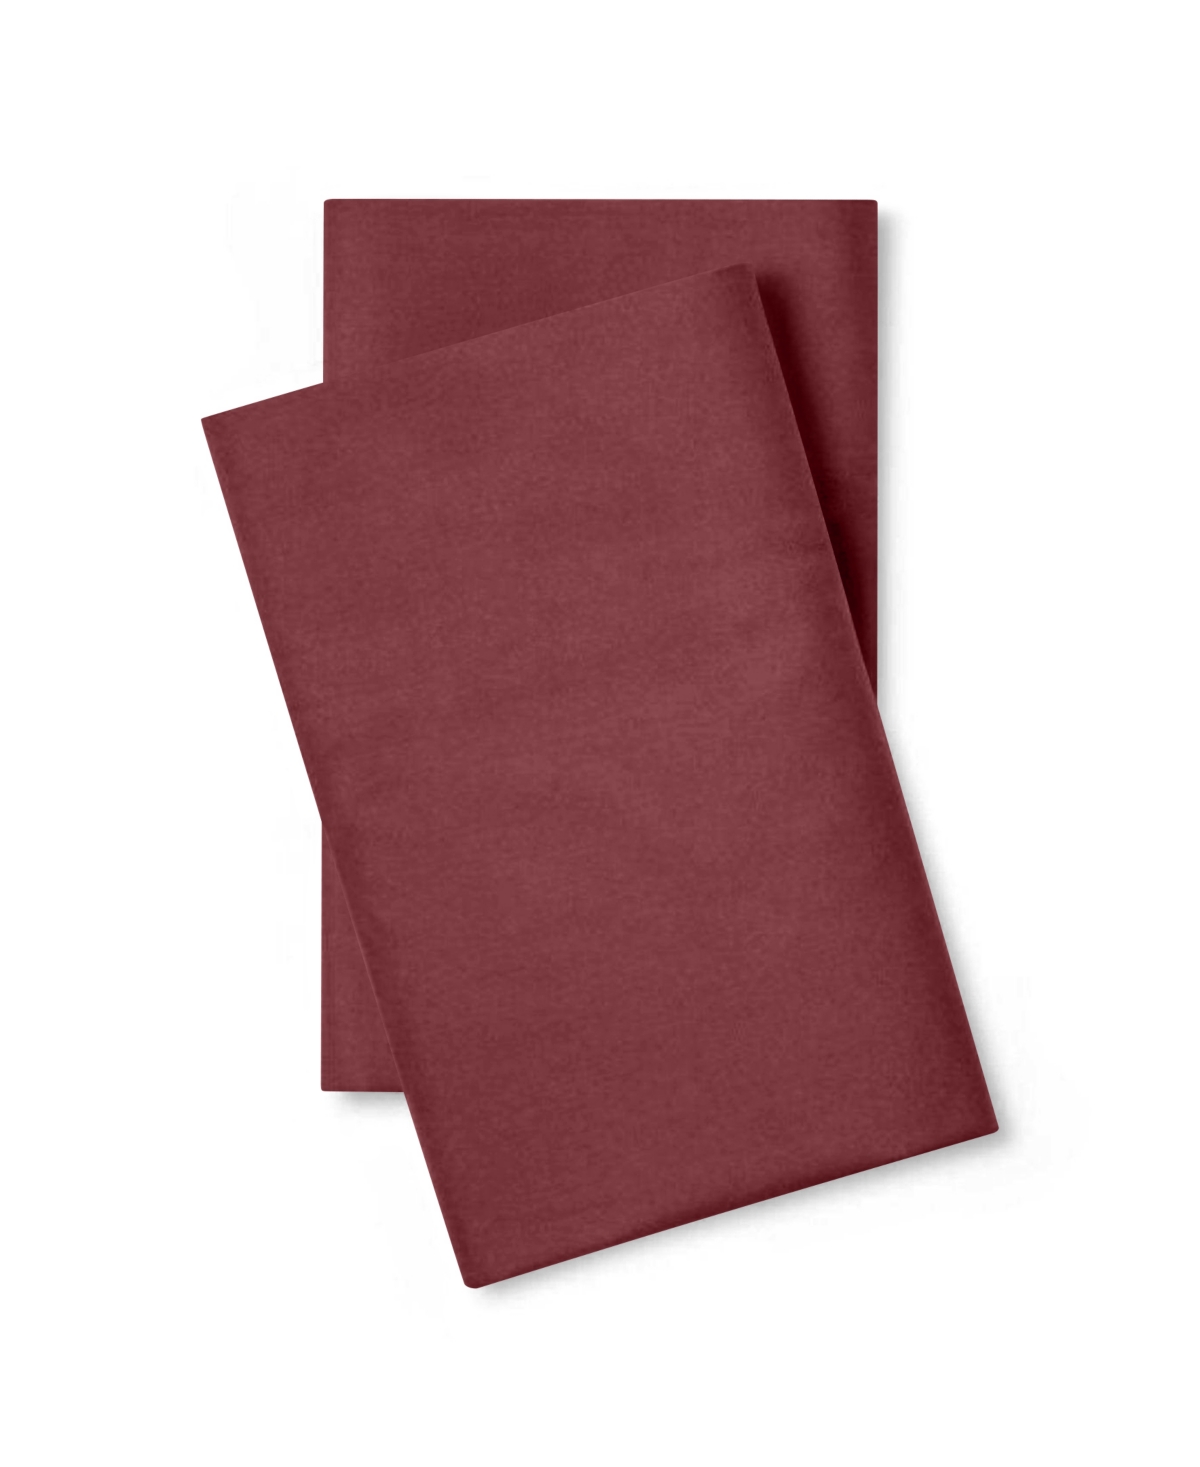 Pillow Gal Luxe Soft Smooth 2 Piece Pillowcase Set, King/california King In Plum